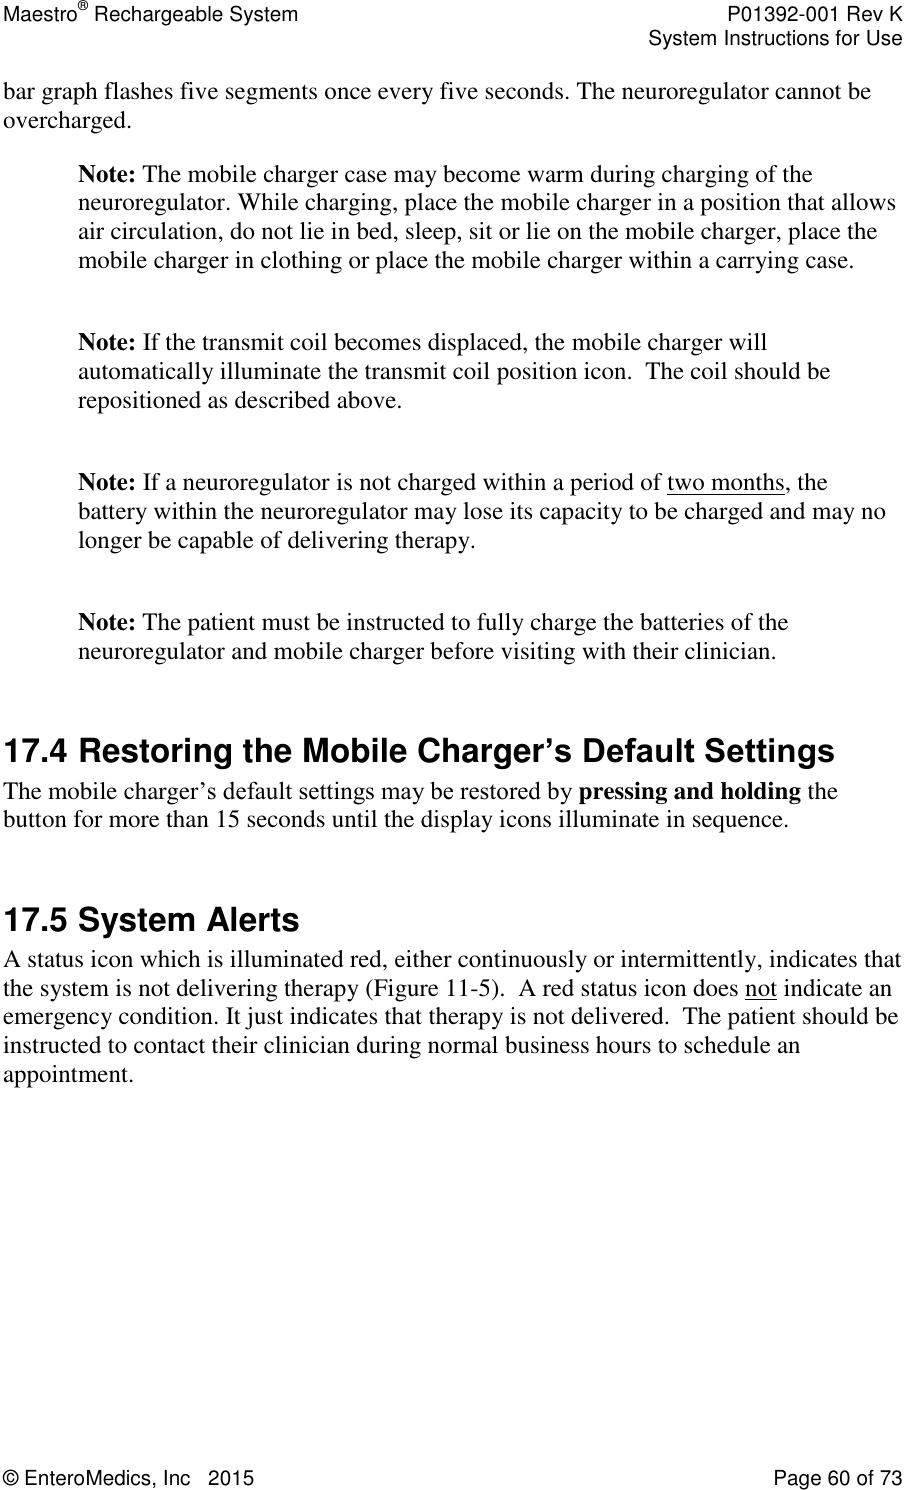 Maestro® Rechargeable System    P01392-001 Rev K     System Instructions for Use  © EnteroMedics, Inc   2015  Page 60 of 73  bar graph flashes five segments once every five seconds. The neuroregulator cannot be overcharged. Note: The mobile charger case may become warm during charging of the neuroregulator. While charging, place the mobile charger in a position that allows air circulation, do not lie in bed, sleep, sit or lie on the mobile charger, place the mobile charger in clothing or place the mobile charger within a carrying case.   Note: If the transmit coil becomes displaced, the mobile charger will automatically illuminate the transmit coil position icon.  The coil should be repositioned as described above.  Note: If a neuroregulator is not charged within a period of two months, the battery within the neuroregulator may lose its capacity to be charged and may no longer be capable of delivering therapy.   Note: The patient must be instructed to fully charge the batteries of the neuroregulator and mobile charger before visiting with their clinician.  17.4 Restoring the Mobile Charger’s Default Settings The mobile charger’s default settings may be restored by pressing and holding the button for more than 15 seconds until the display icons illuminate in sequence.     17.5 System Alerts A status icon which is illuminated red, either continuously or intermittently, indicates that the system is not delivering therapy (Figure 11-5).  A red status icon does not indicate an emergency condition. It just indicates that therapy is not delivered.  The patient should be instructed to contact their clinician during normal business hours to schedule an appointment.    